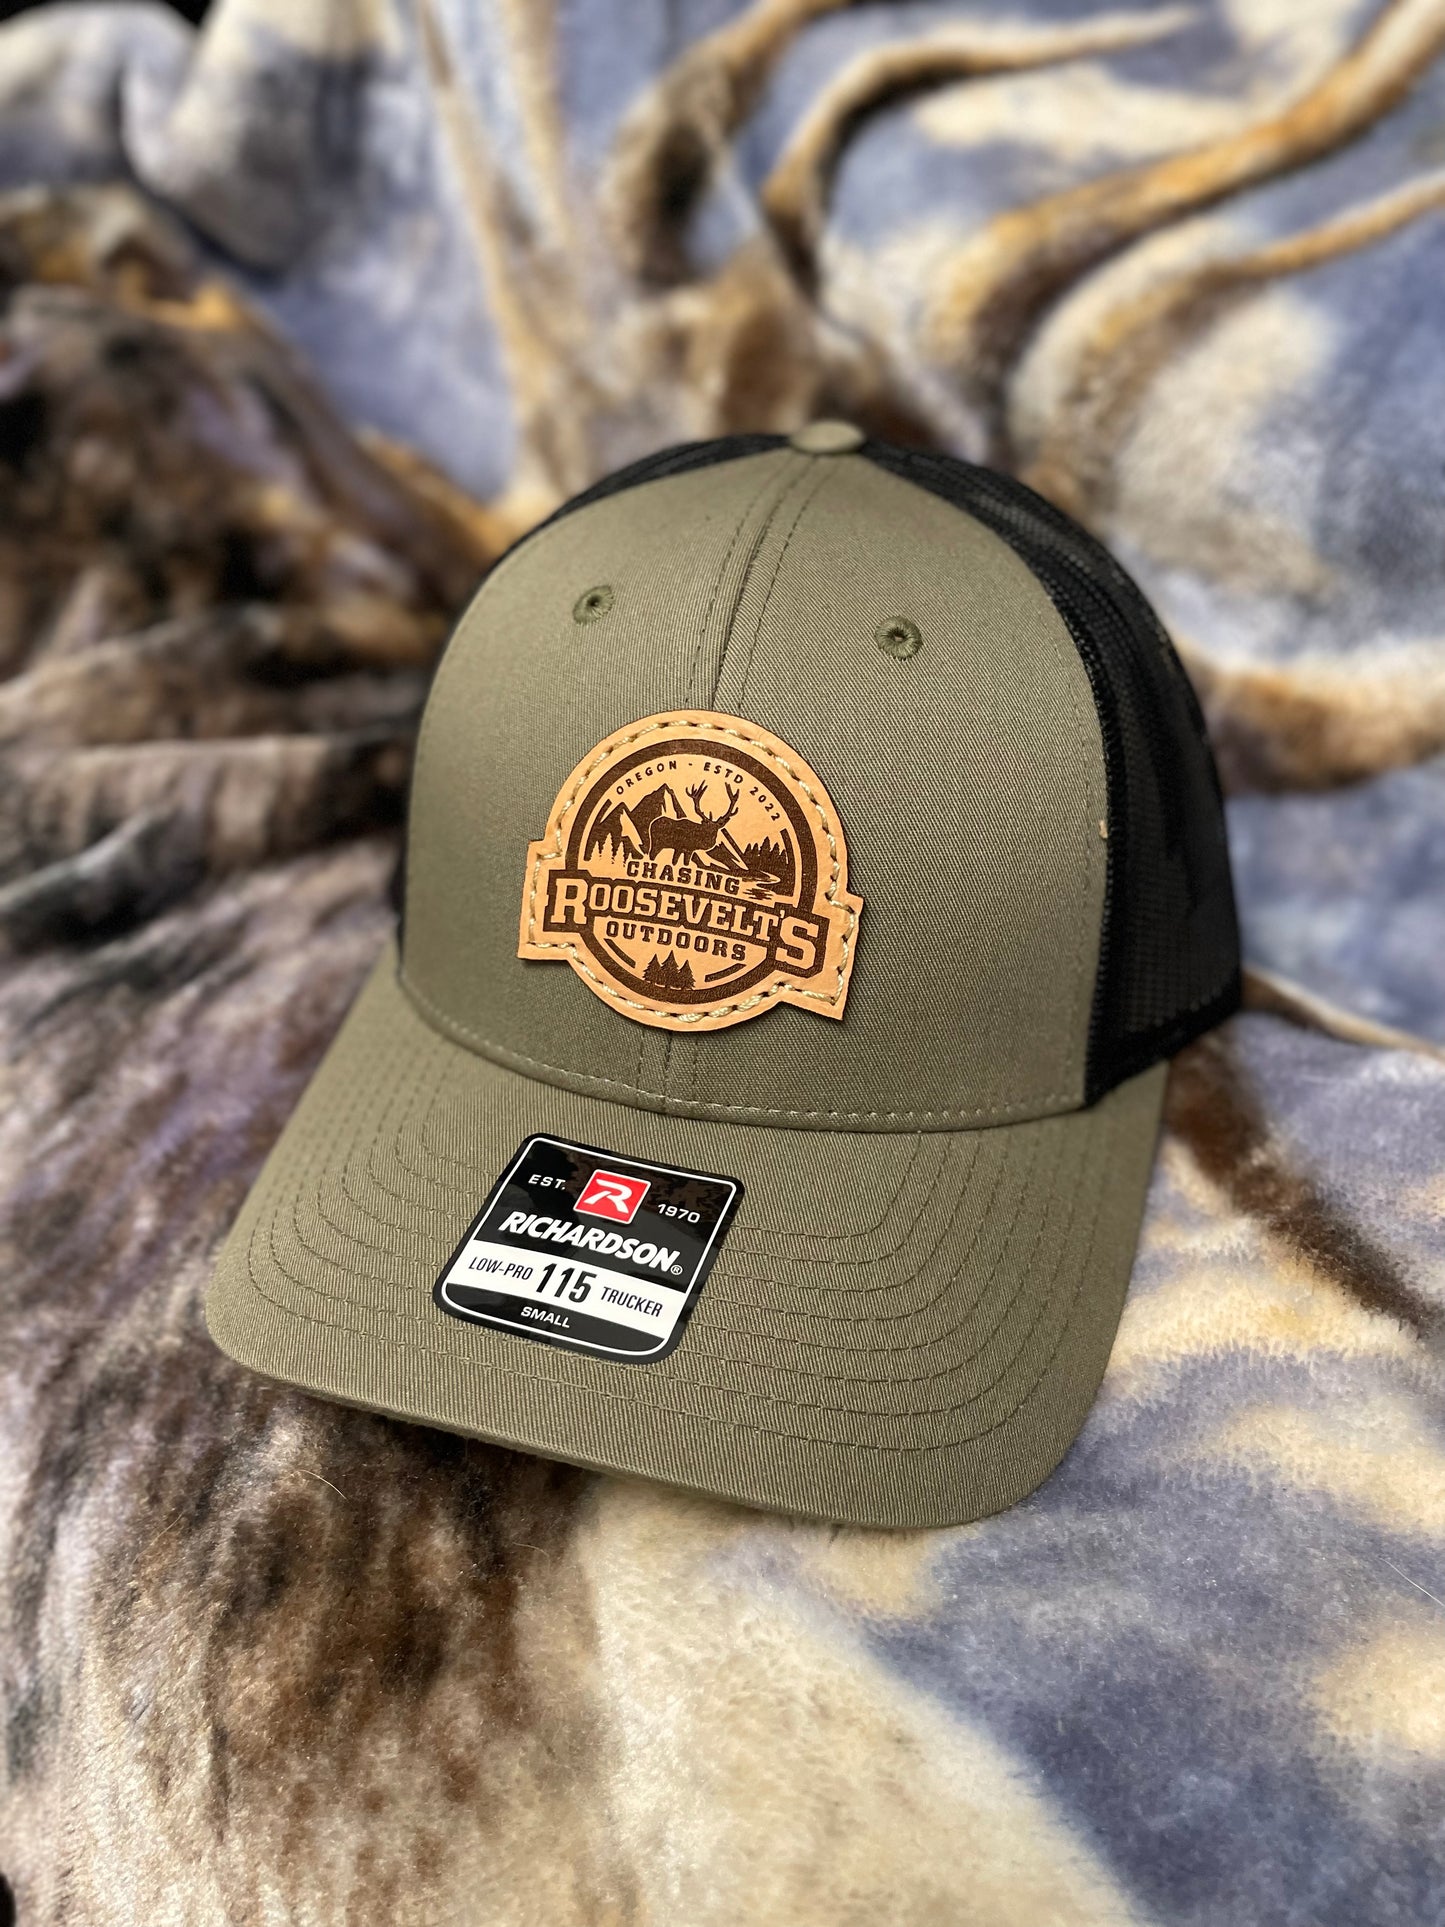 Chasing Roosevelts Outdoors Leather Patch Hat